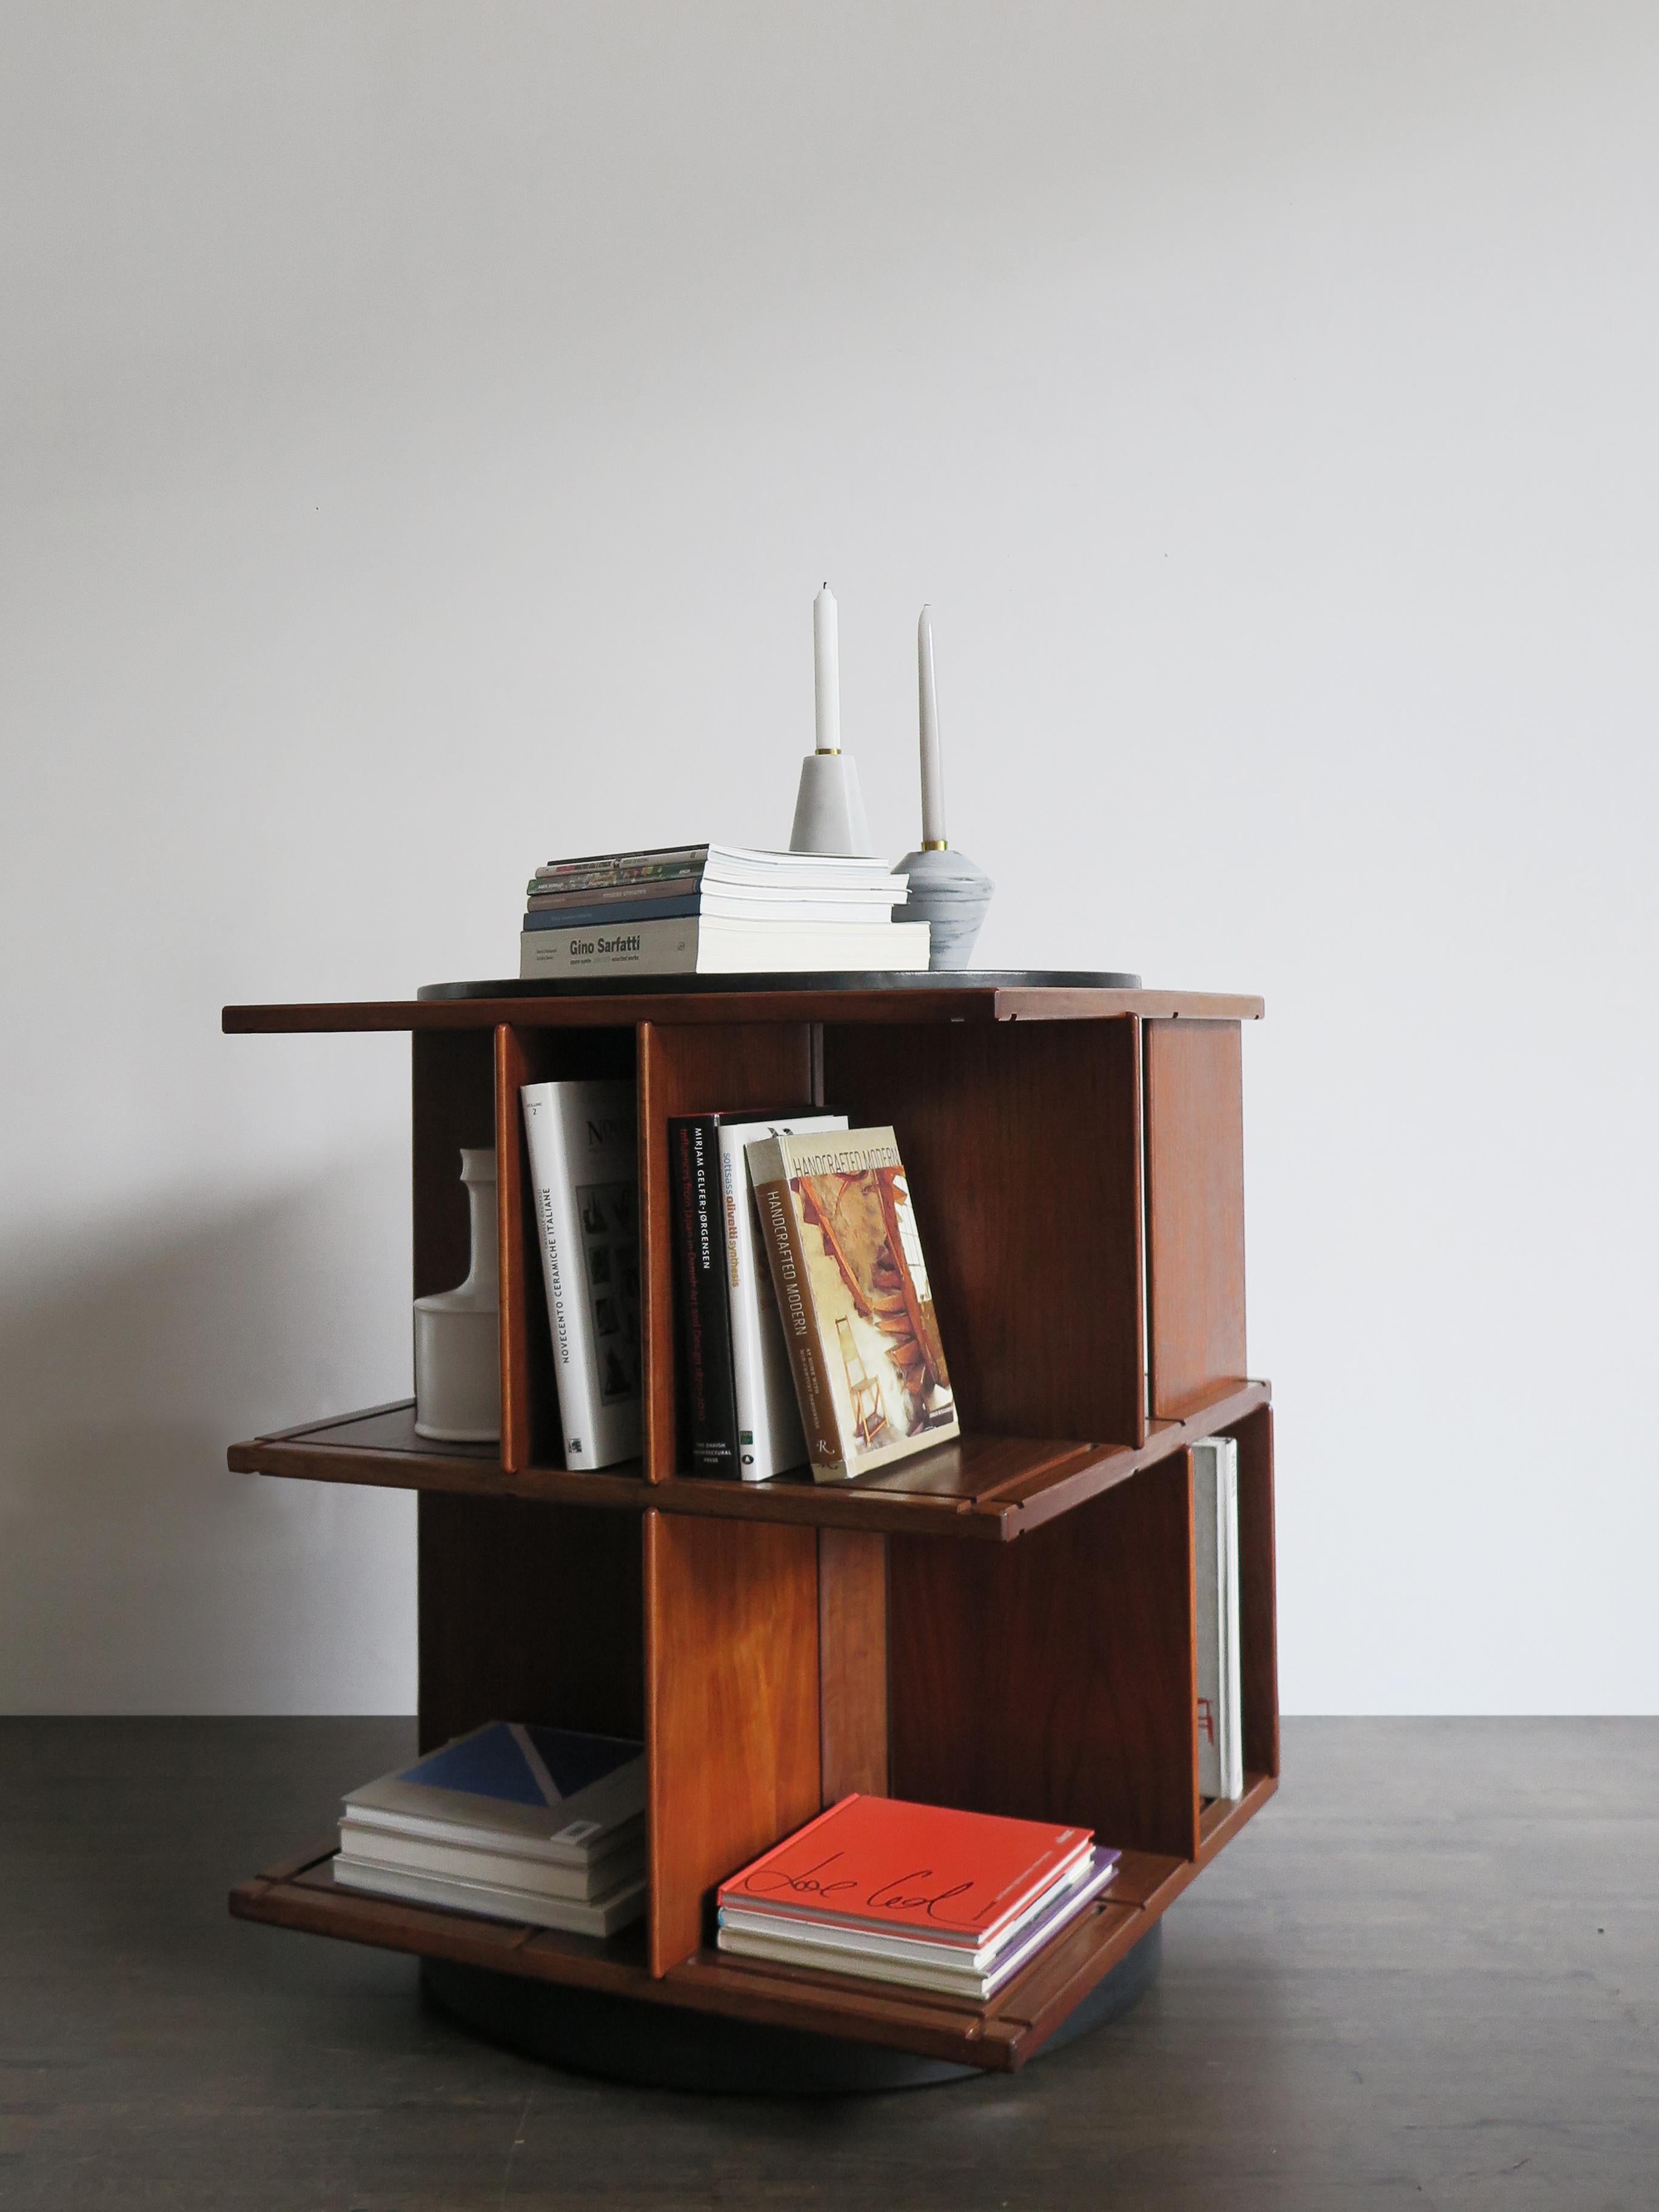 Italian midcentury modern design swivel bookcase model 823 designed by Gianfranco Frattini and manufactured by Bernini, the side walls are movable and can be positioned at will in the appropriate grooves, walnut wood frame with circular upper shelf